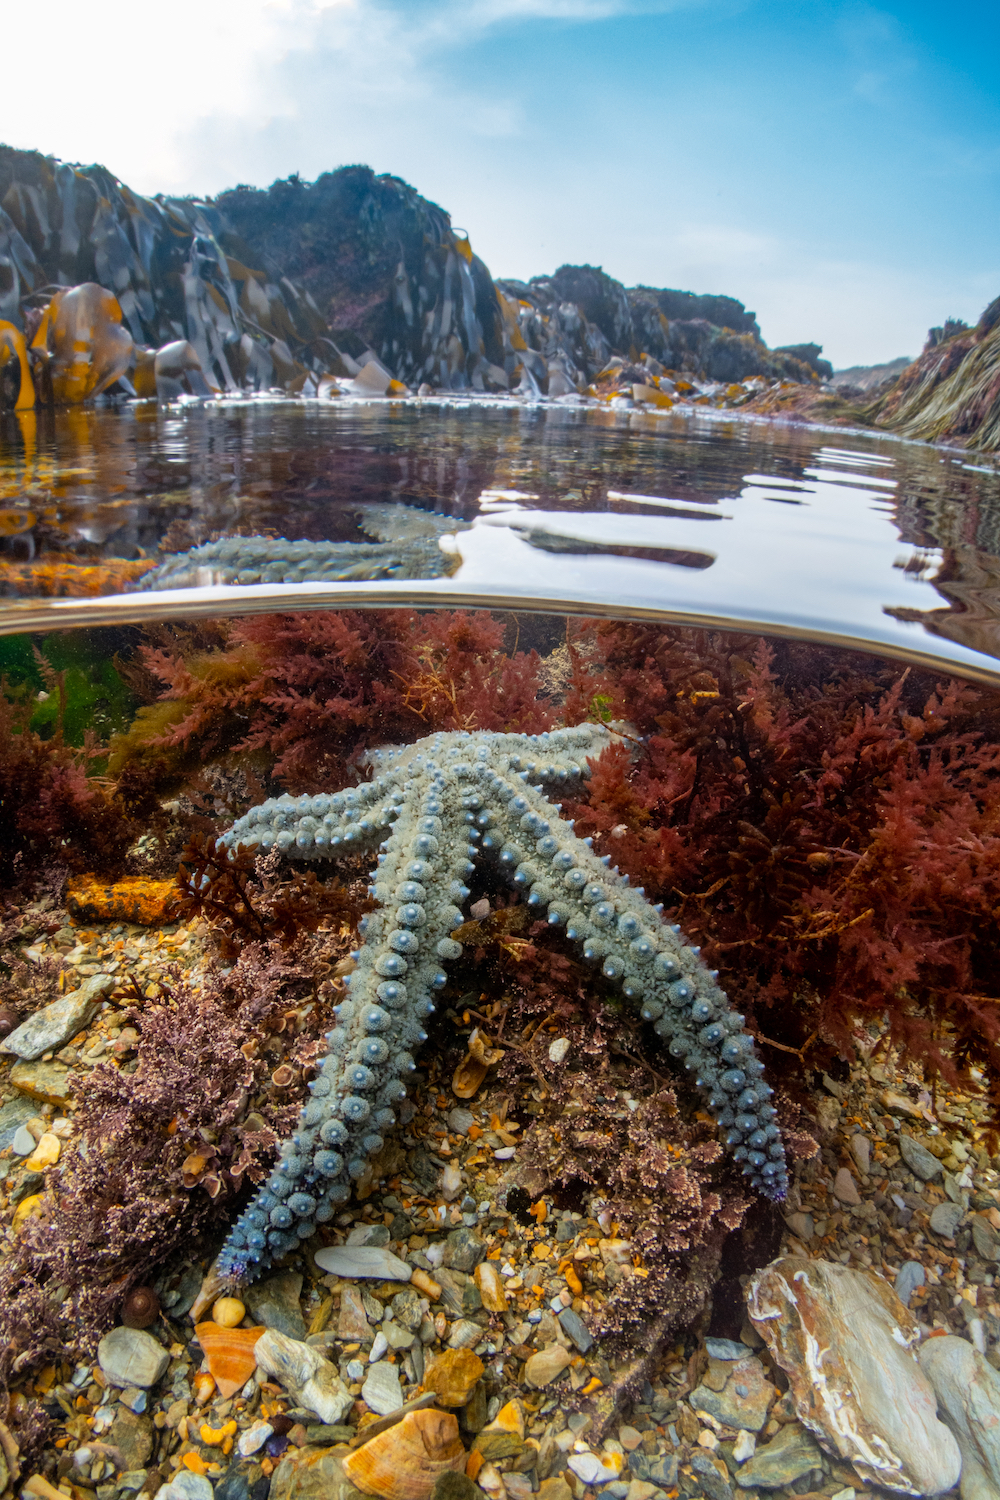  This image, titled 'Rock pool star', won the British Waters: Compact category of UPY 2022. Image: © Martin Stevens/UPY2022